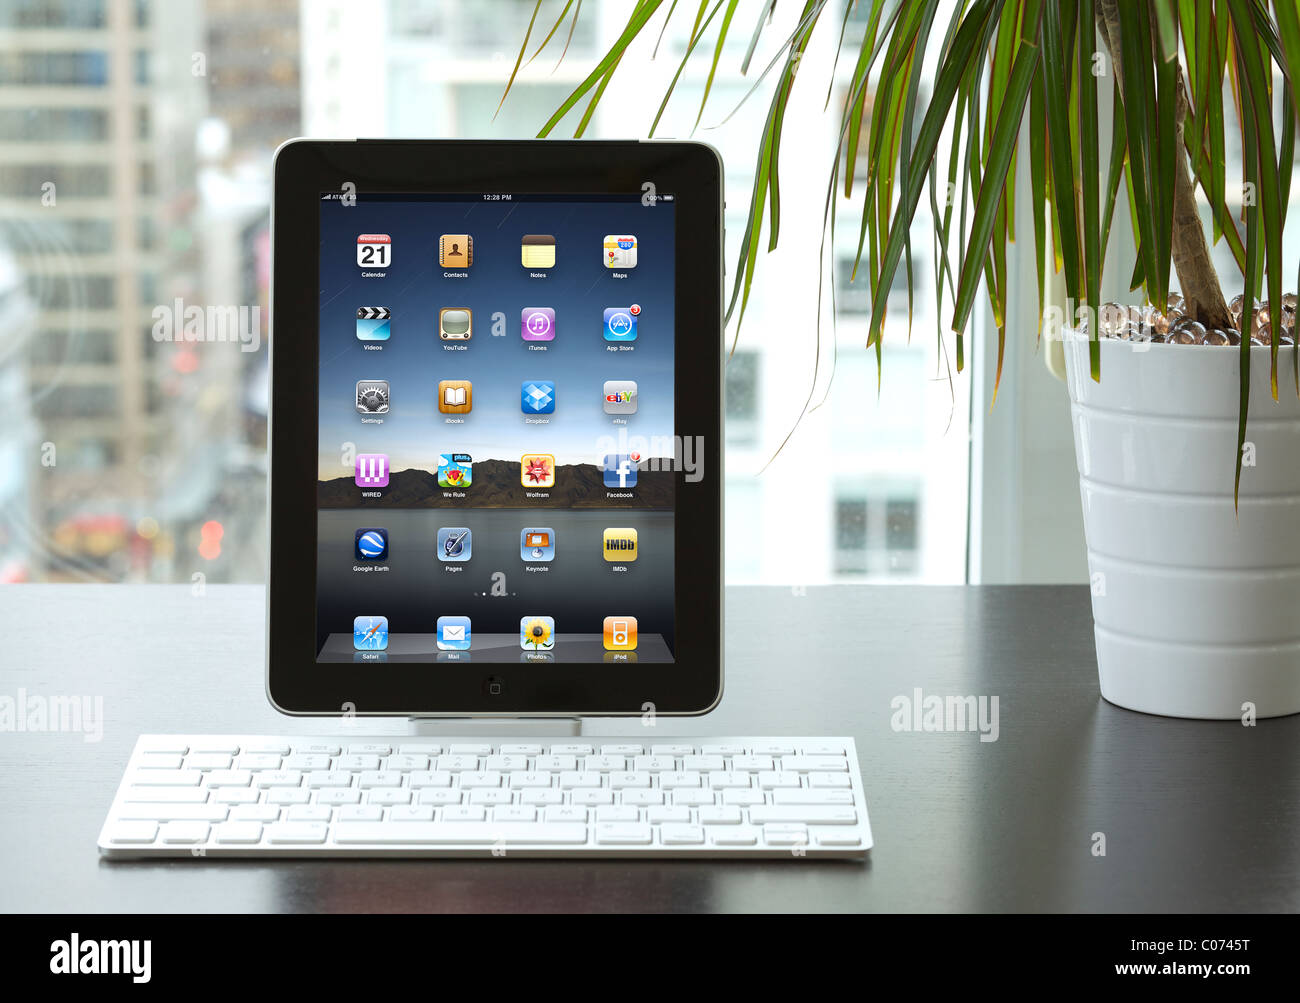 iPad being used in an office with wireless bluetooth keyboard showing the application screen Stock Photo